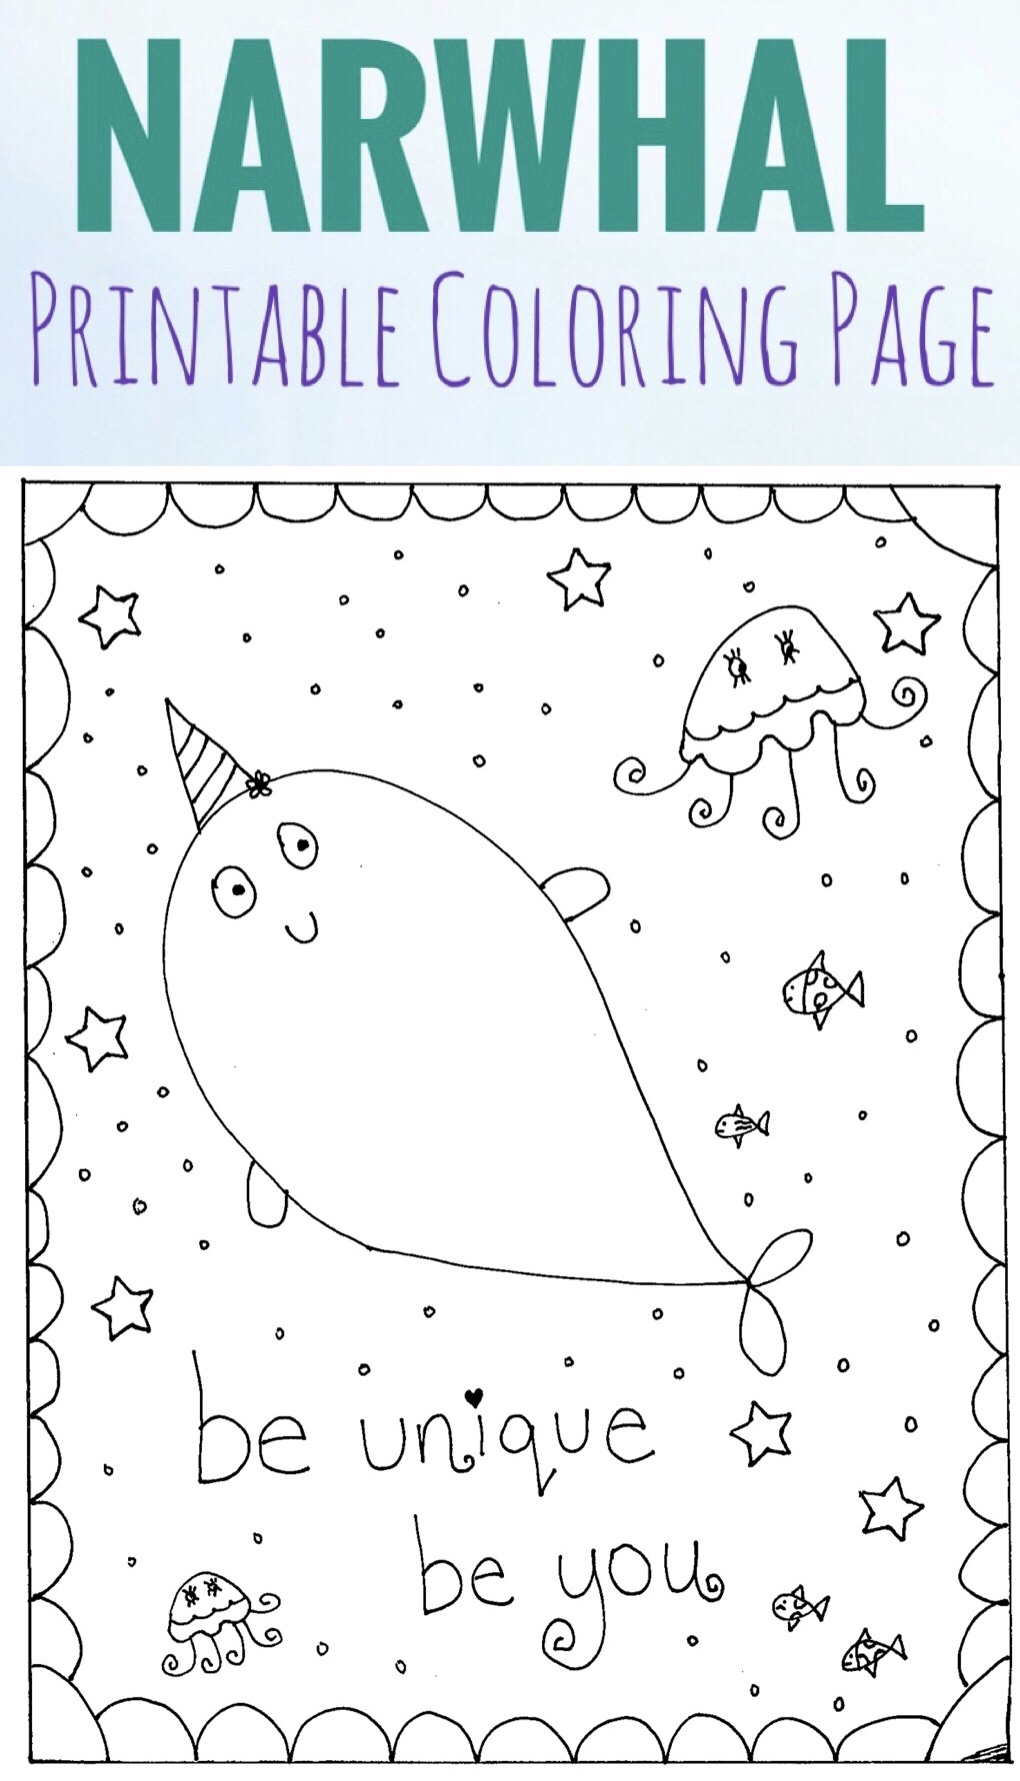 Just narwhal book review and printable coloring page